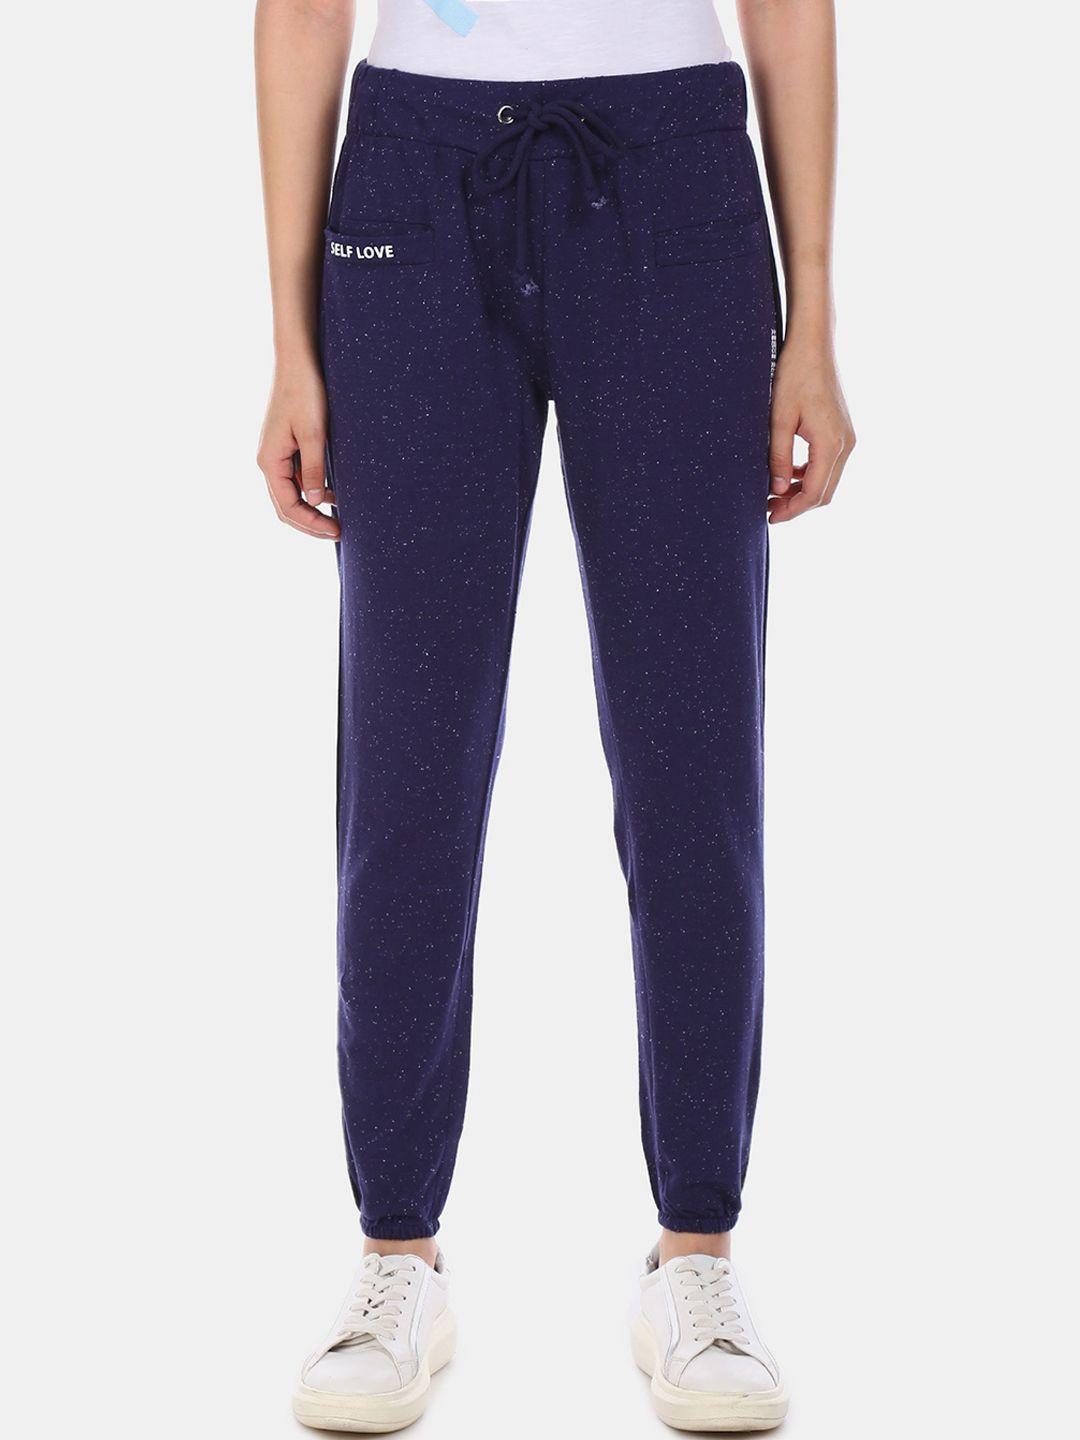 sugr-women-navy-blue-solid-joggers